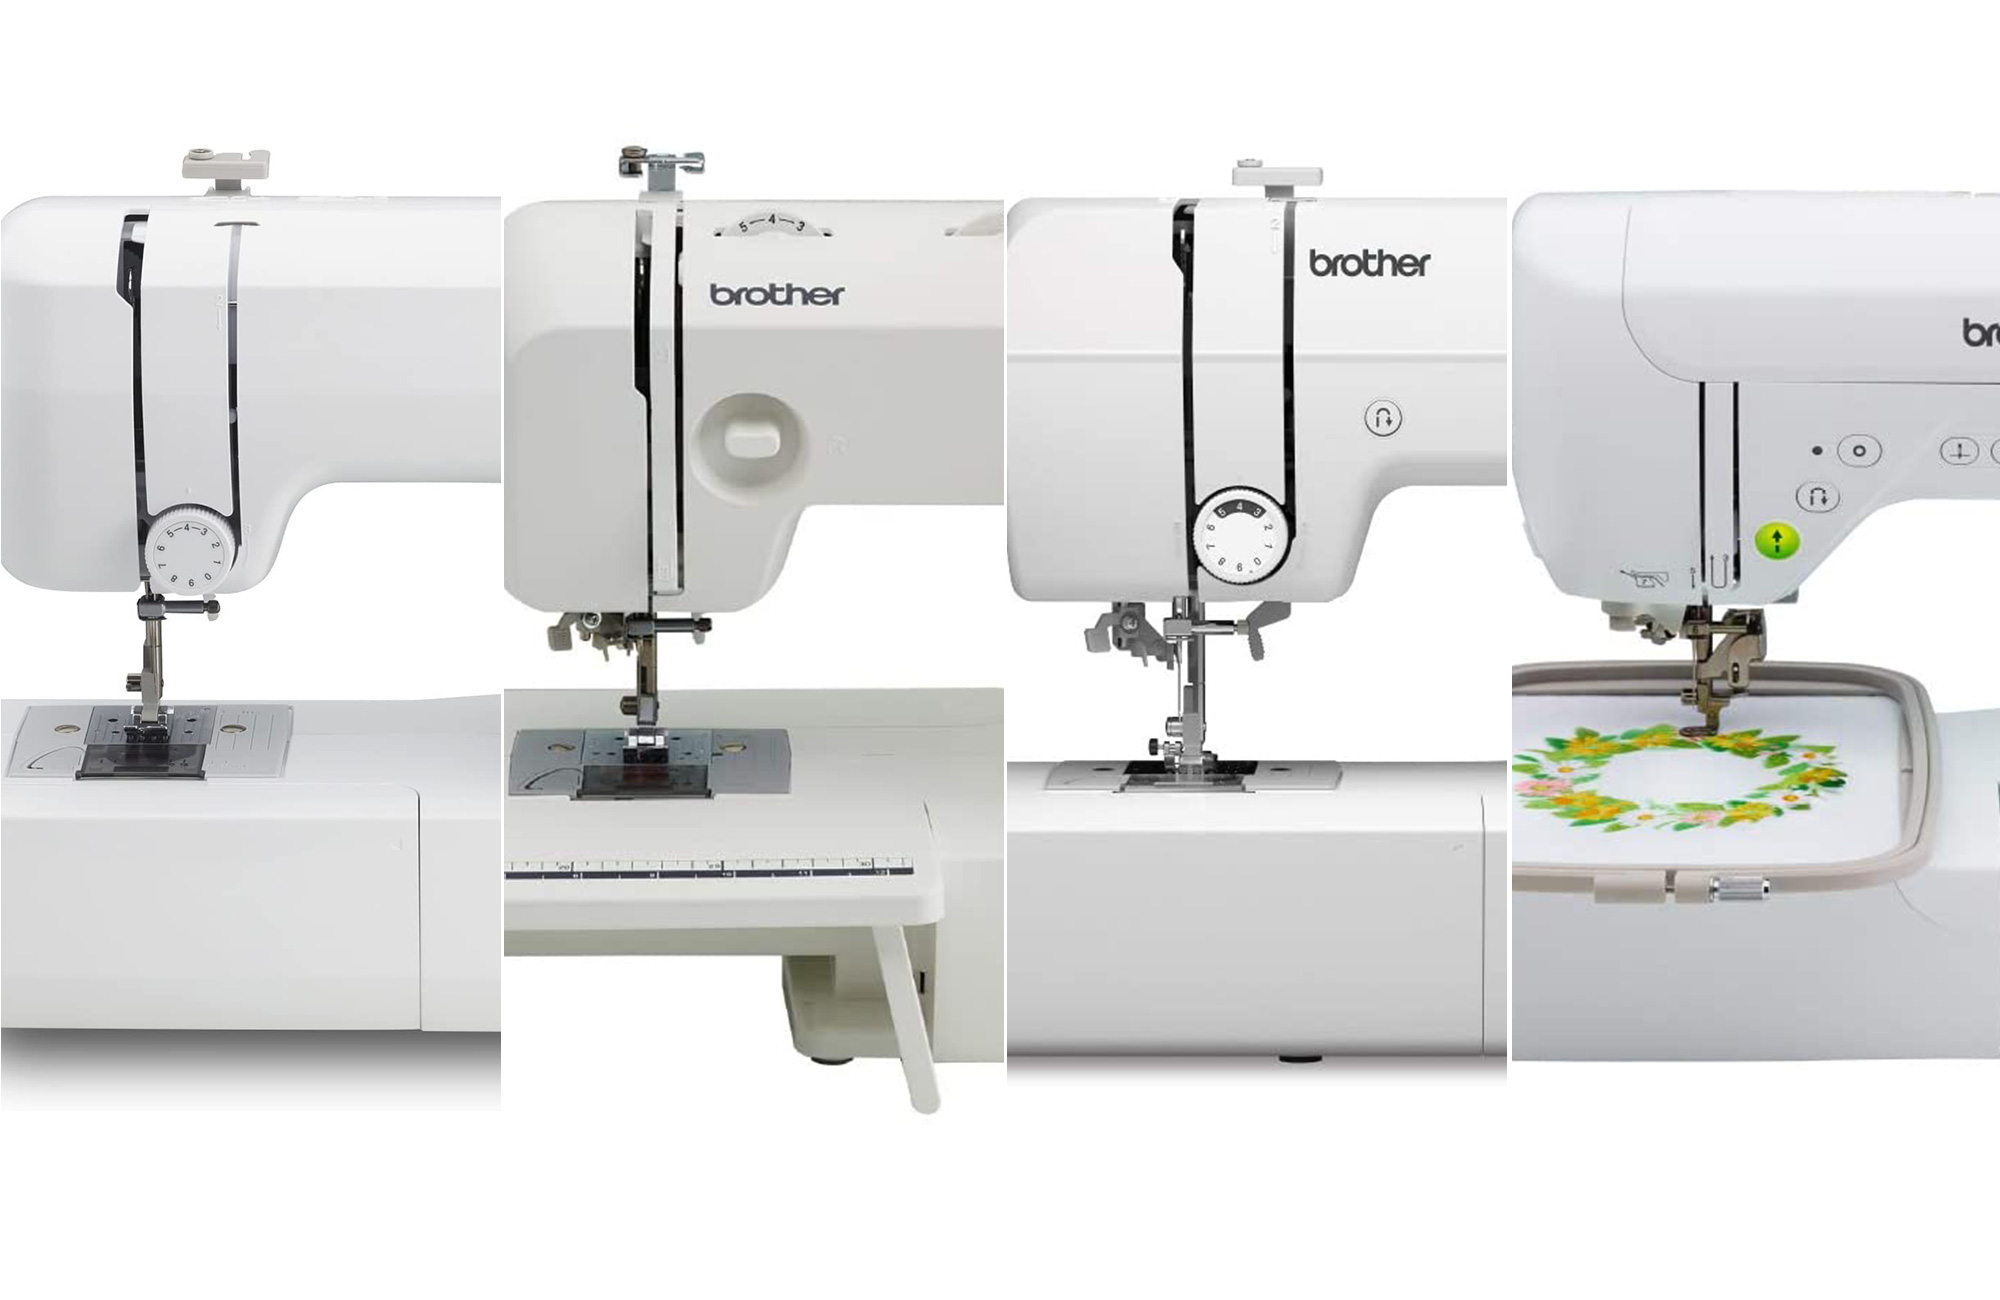 Brother LX3817 Sewing Machine- How to Fill and Load the Bobbin 